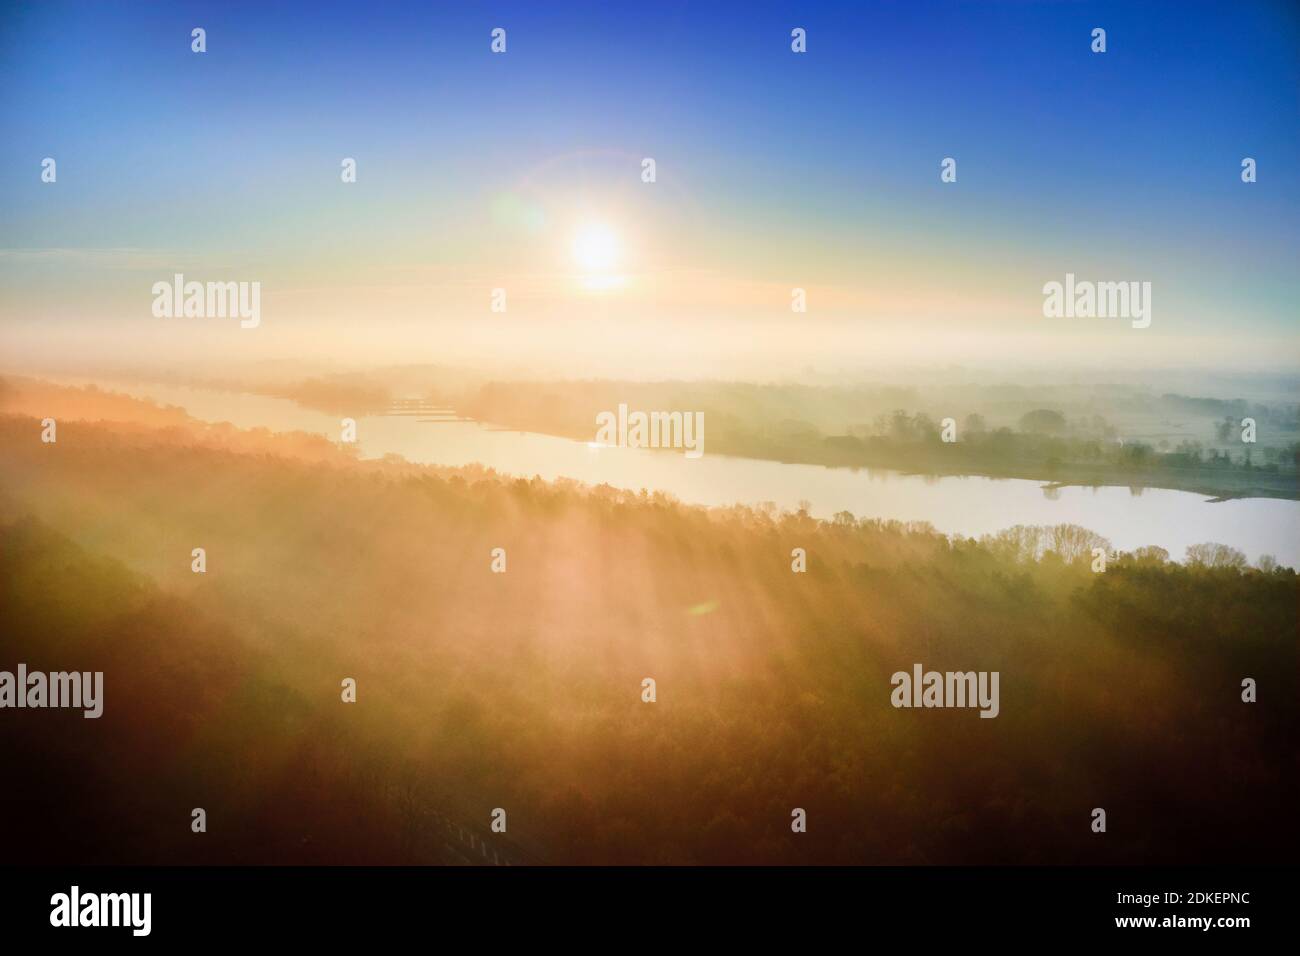 Natural landscape, Germany, Northern Germany, Mecklenburg-Western Pomerania, Elbe near Lauenburg, aerial view at sunrise, golden hour, colored sky, forest and meadows in the morning mist, view towards Grünendeich in Lower Saxony Stock Photo